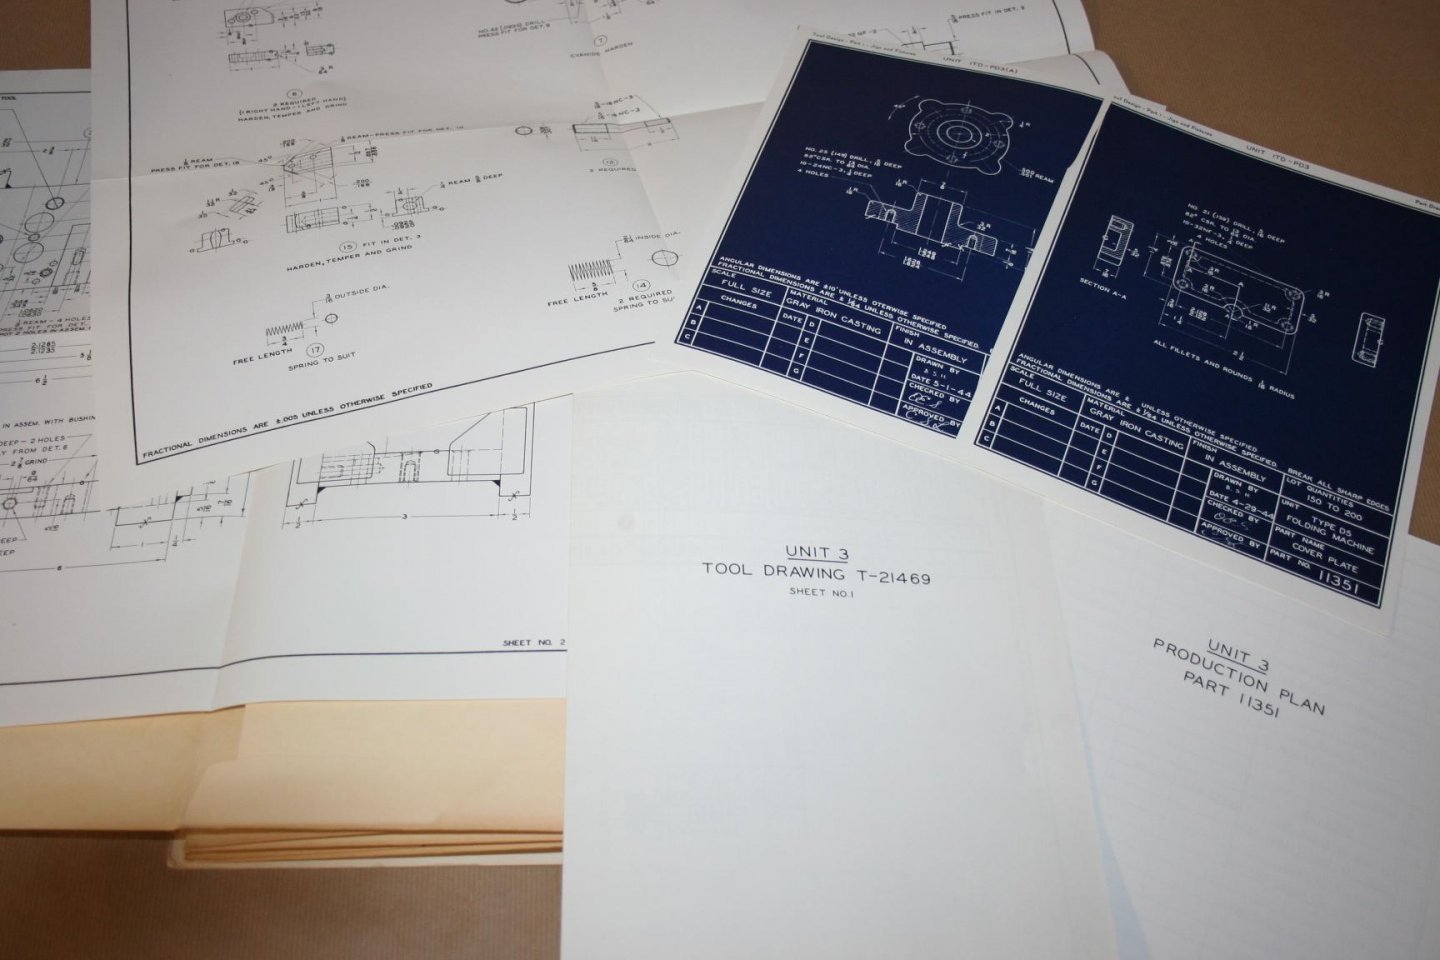  - Jig and Fixture Design --  Volume II  Part Drawings - Production Plans and Tool Drawings